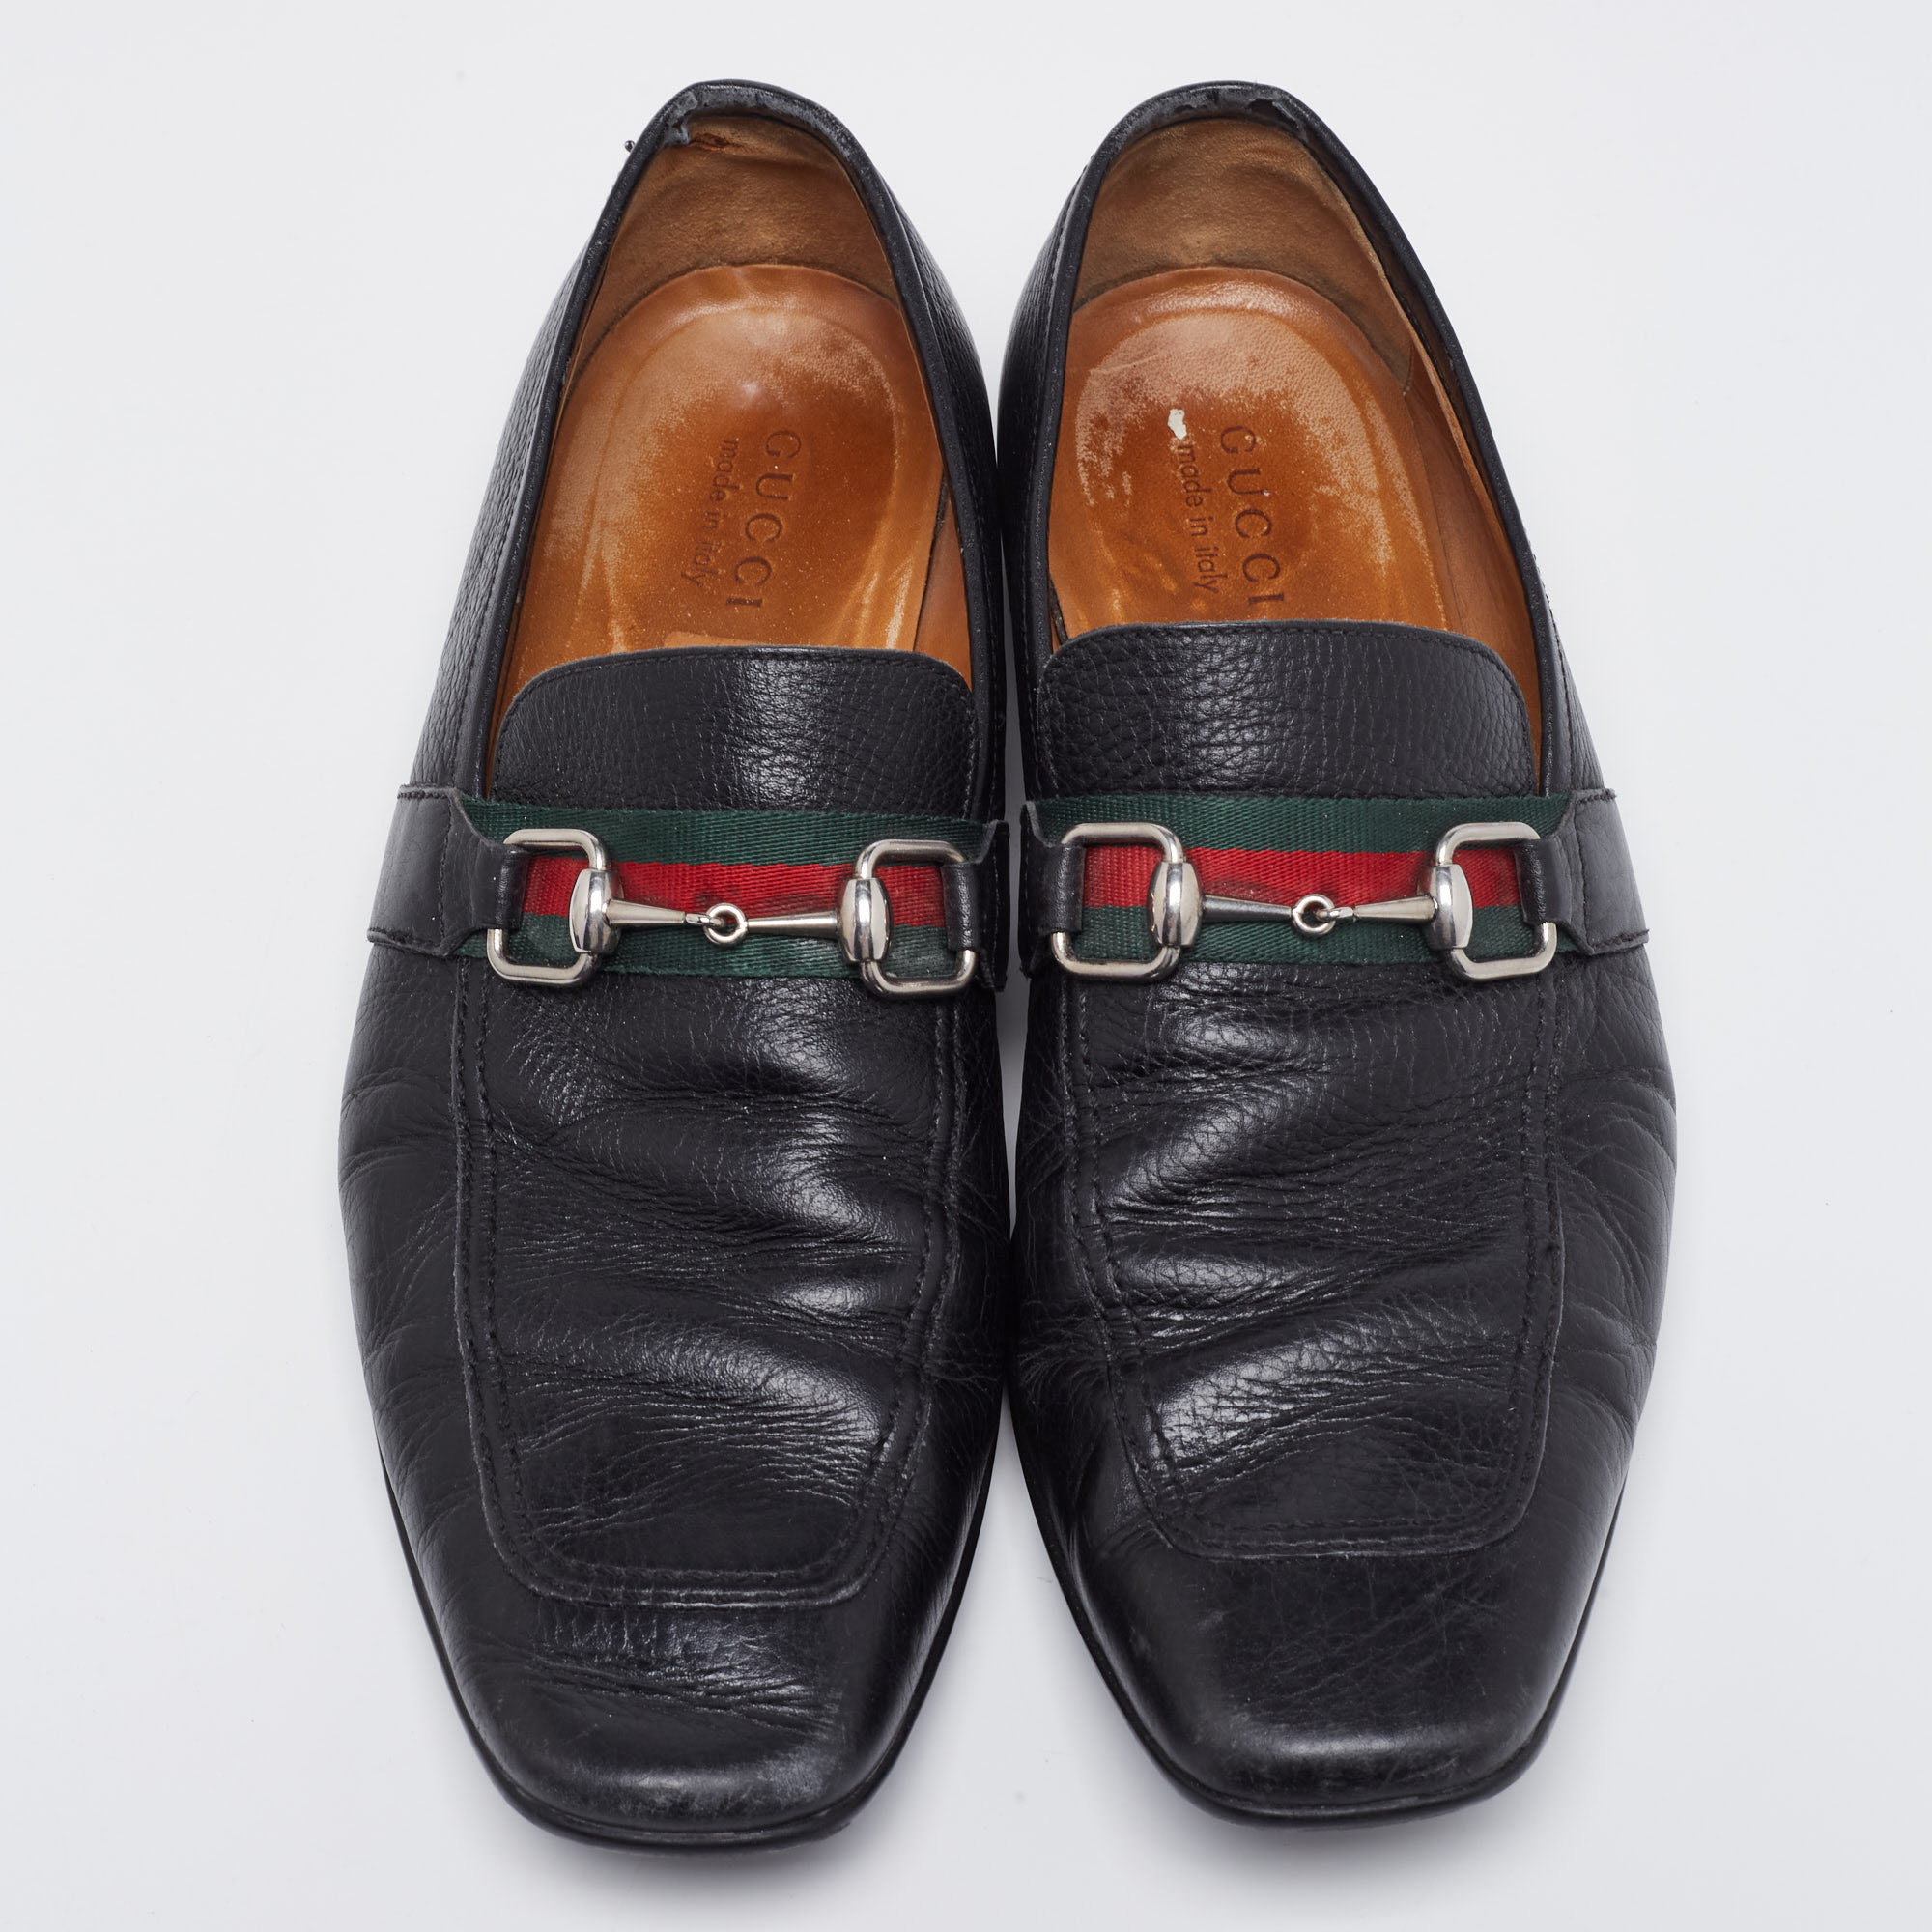 Gucci Black Leather Horsebit Web Detail Slip On Loafers Size 44.5